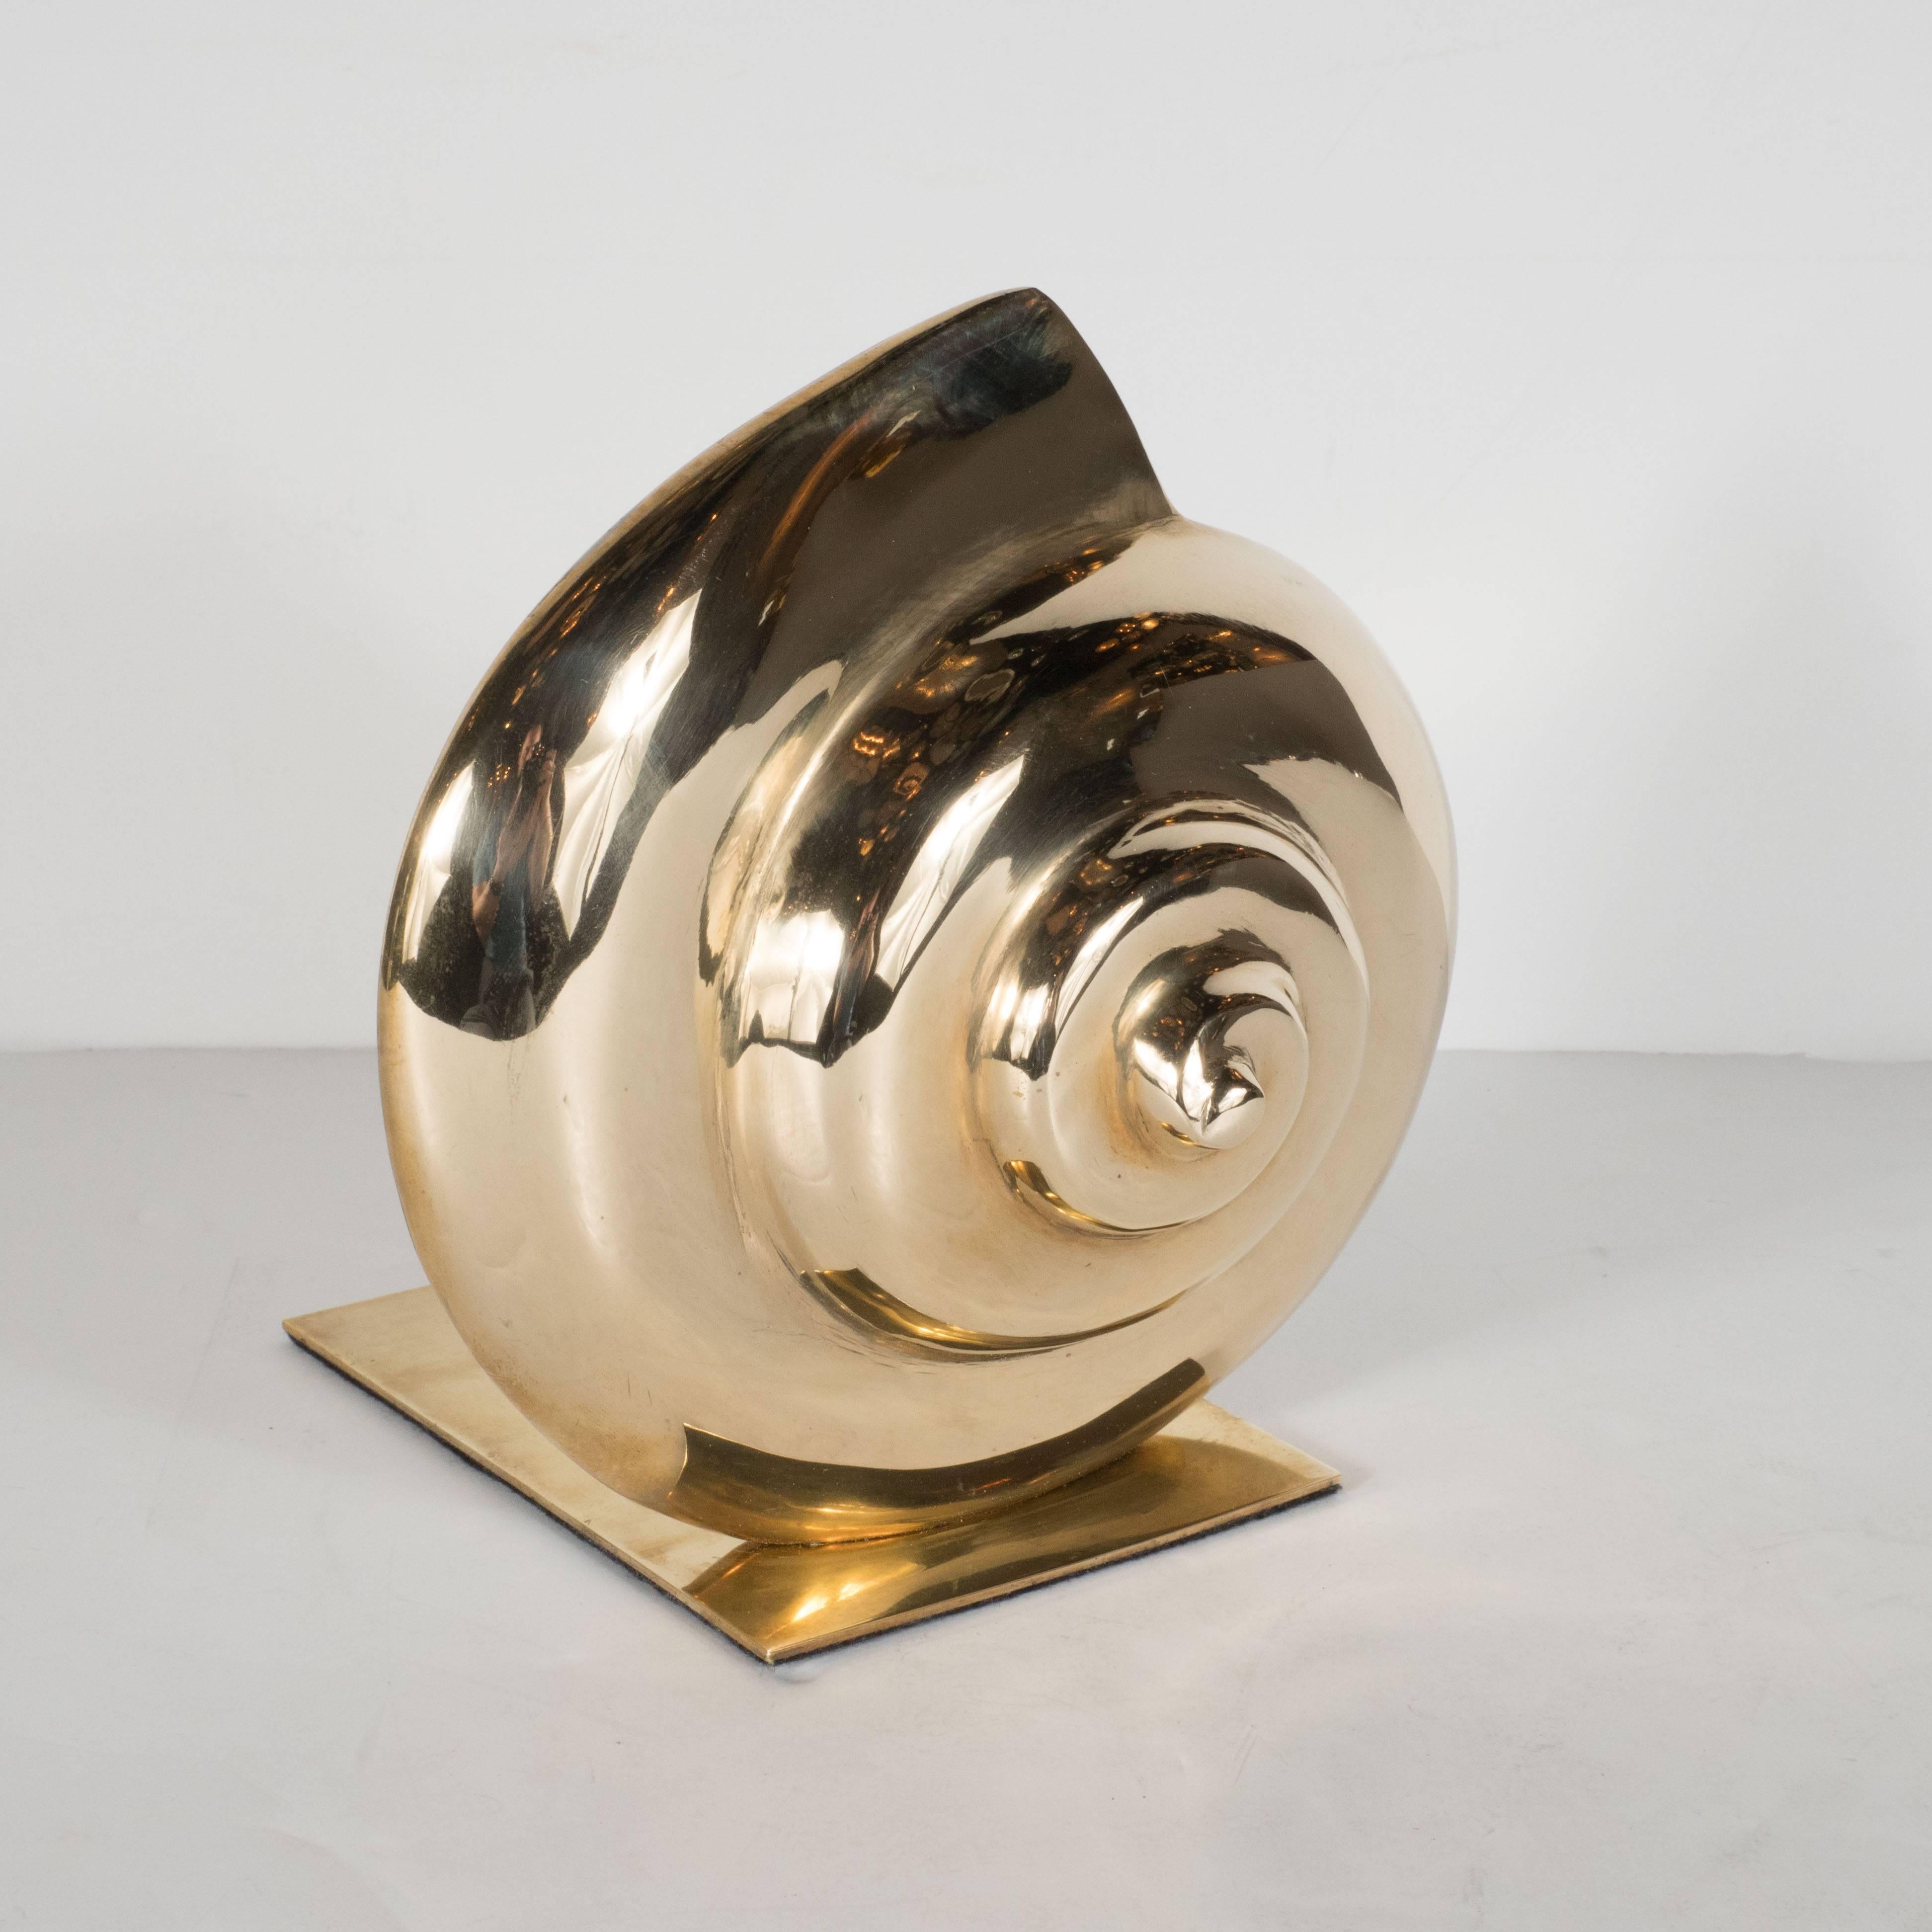 This Mid-Century Modernist pair of bookends offers abstracted sculptural renditions of the nautilus shell- a Classic inspiration in modern design (for everything from Vladimir Kagan chairs to Patek Phillipe watches)- realized in lustrous polished